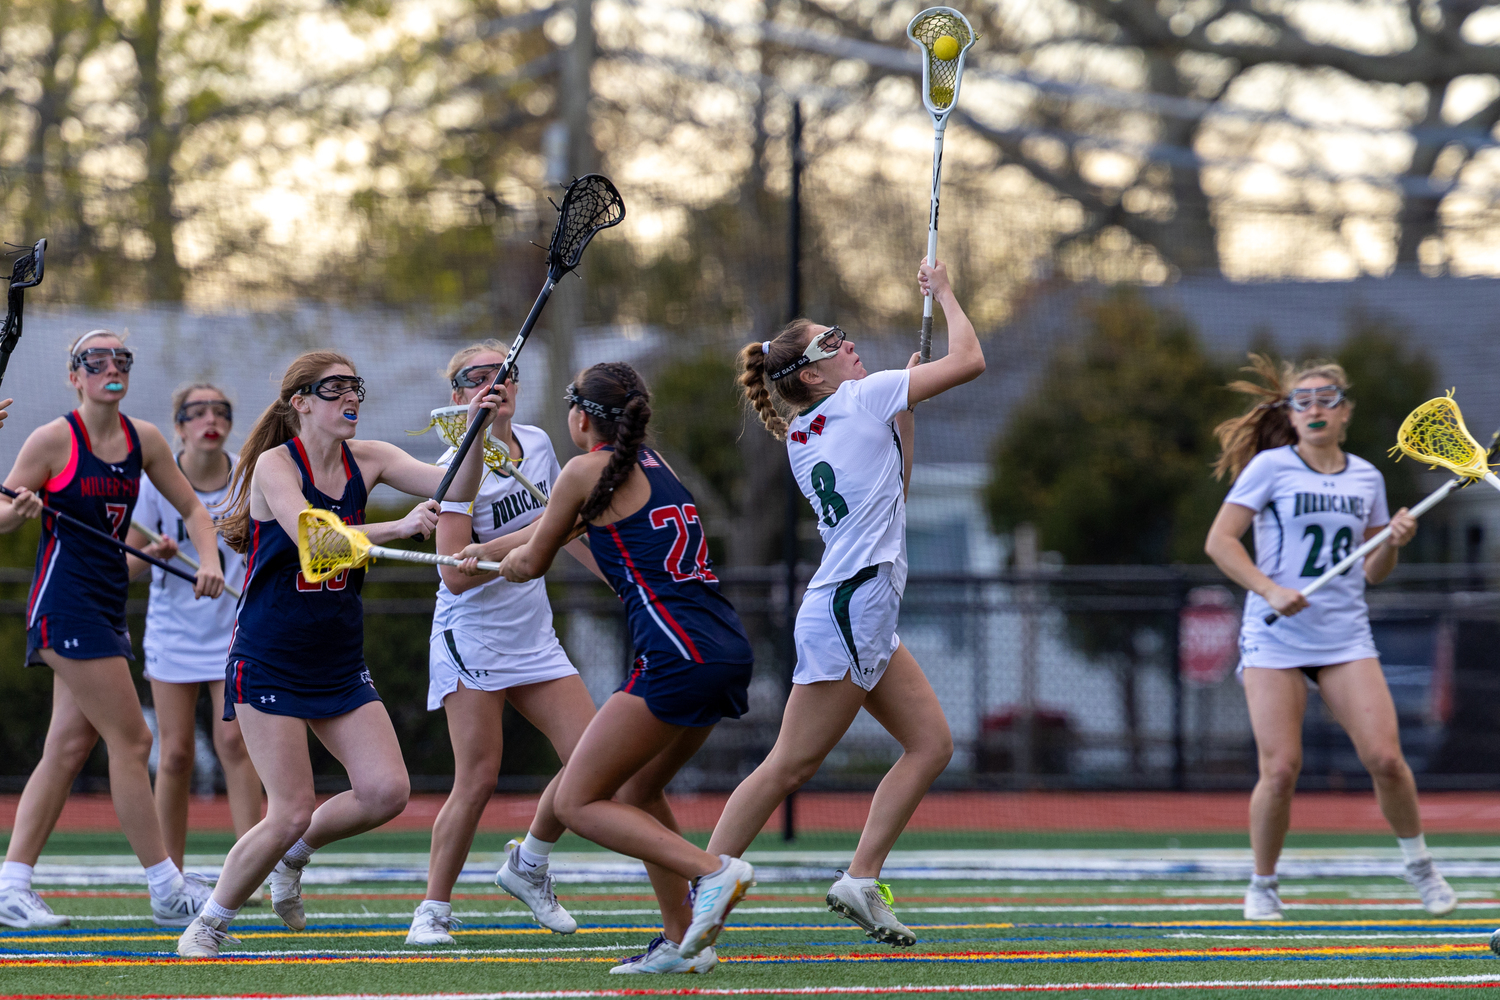 Sophomore attack Ava Derby grabs the ball off the draw during Westhampton Beach's 11-5 win over Miller Place April 24. RON ESPOSITO